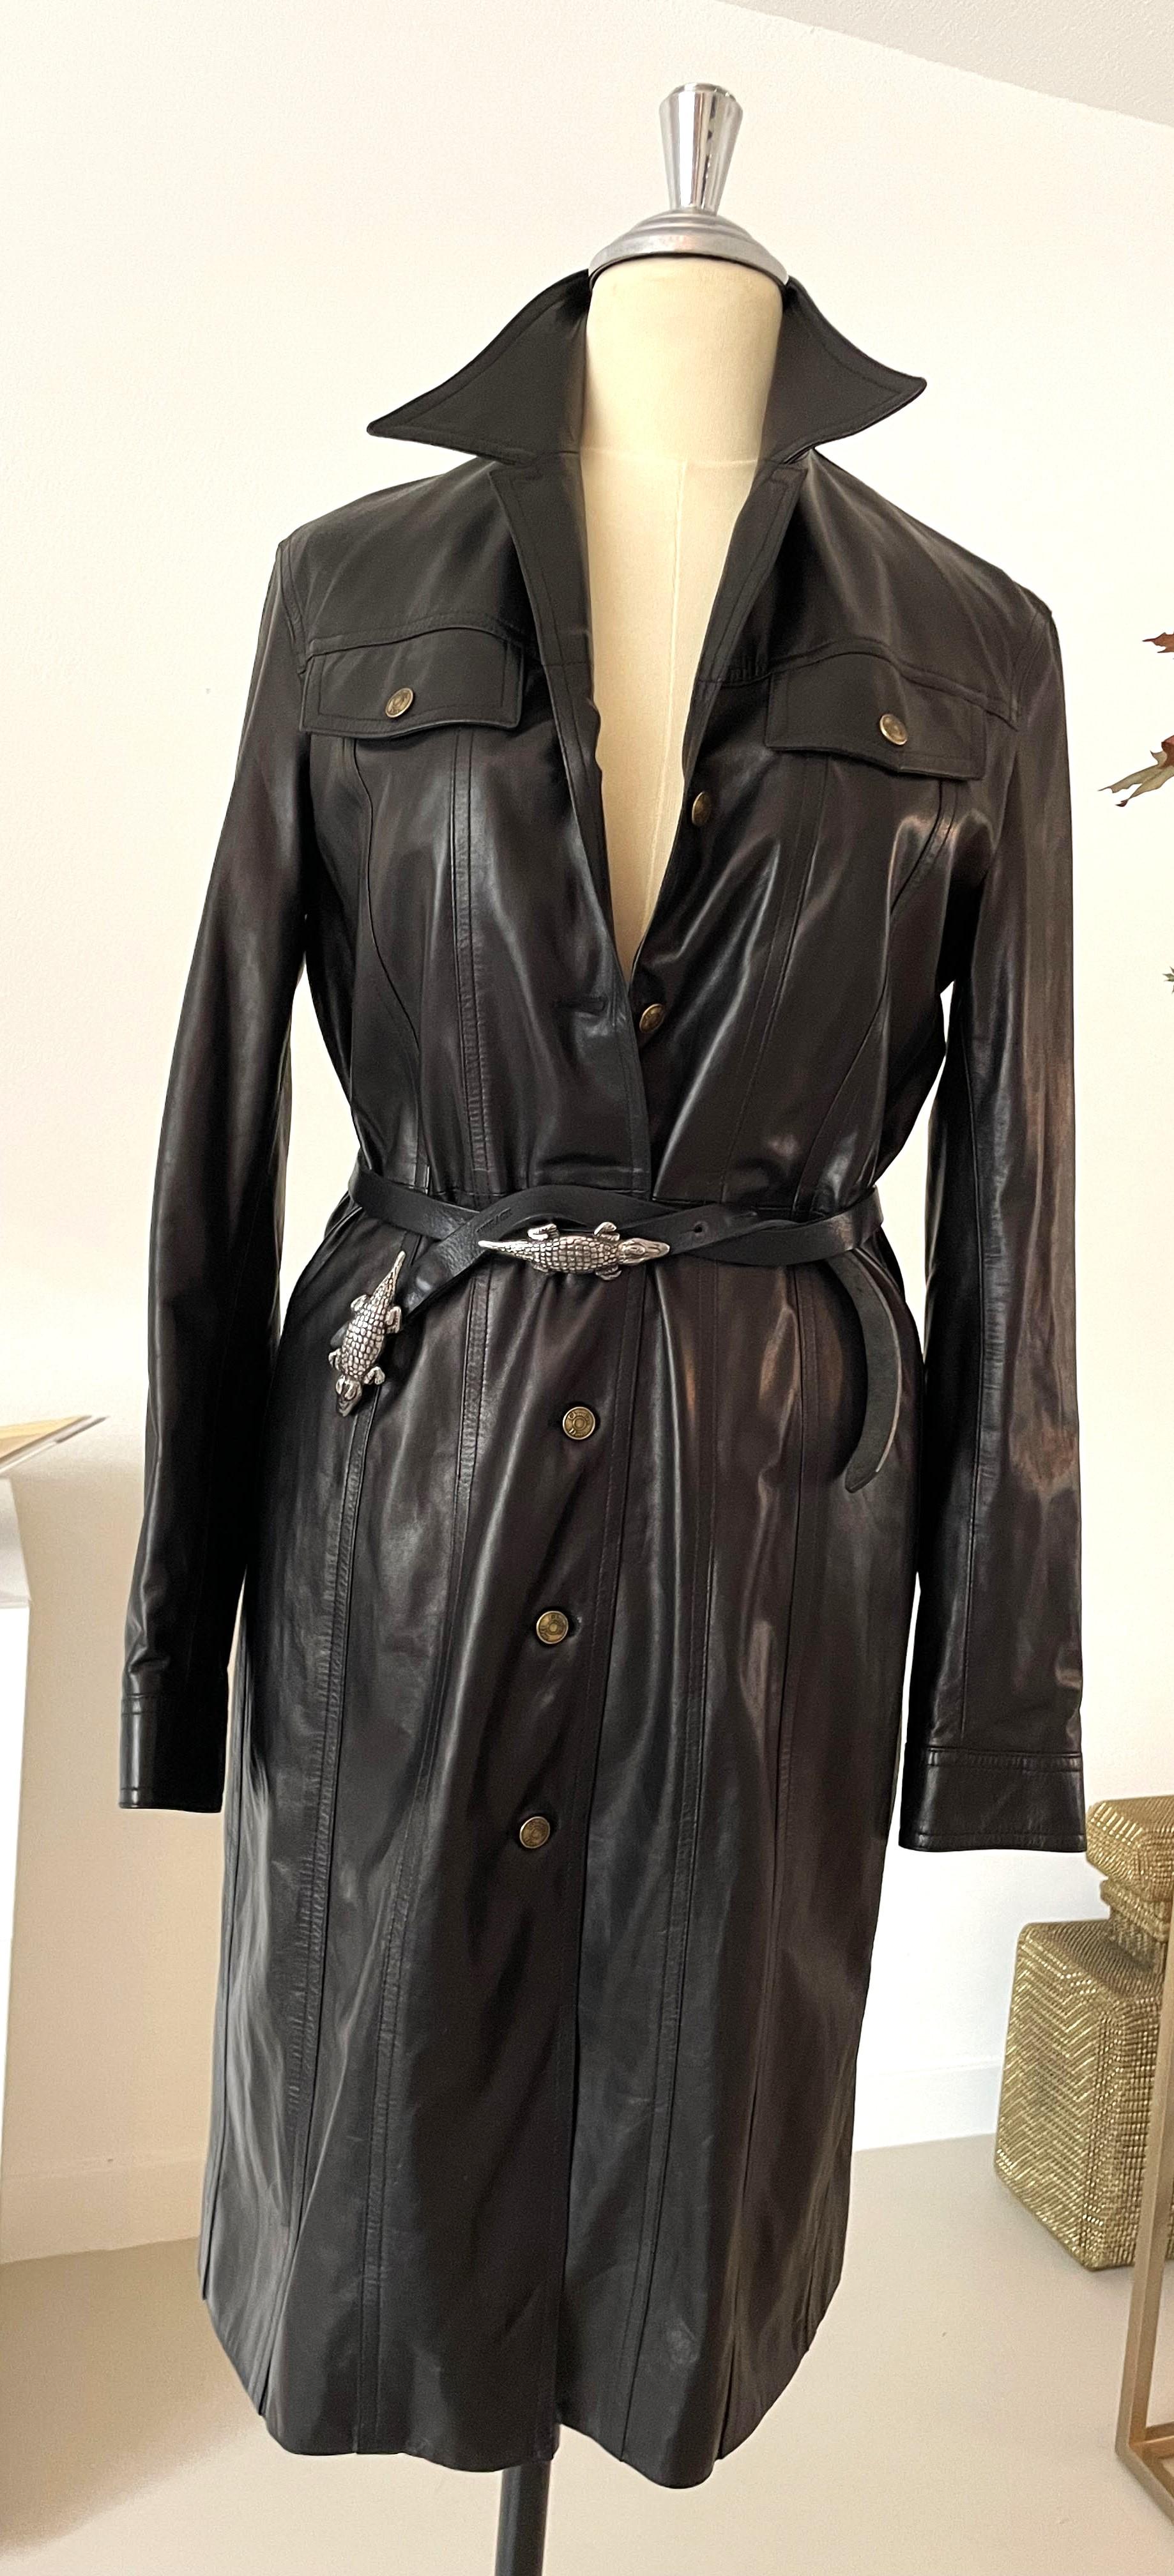 This extraordinary first-class & excellent Christian Dior lambs leather black coat from the vintage 90s era is a highly sought-after and stylish fashion item. You can even wear it as a dress with a nice belt!

A very well kept piece, worn by a model